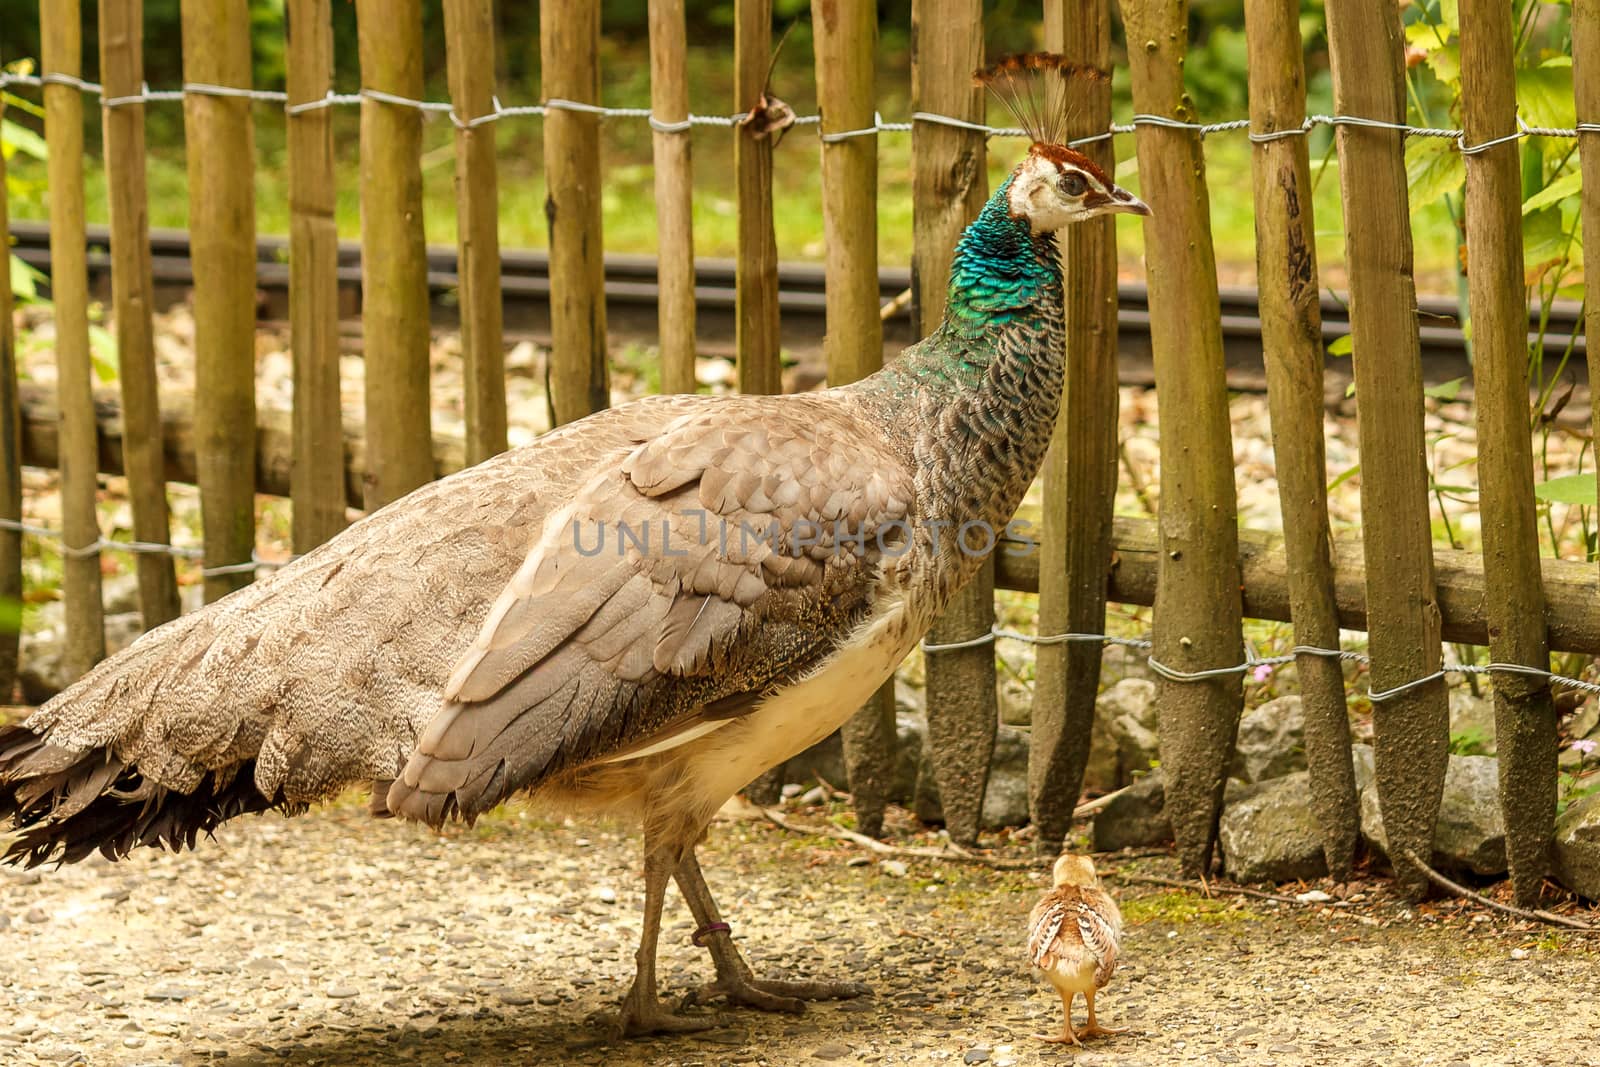 A very young peacock out walking with an adult female